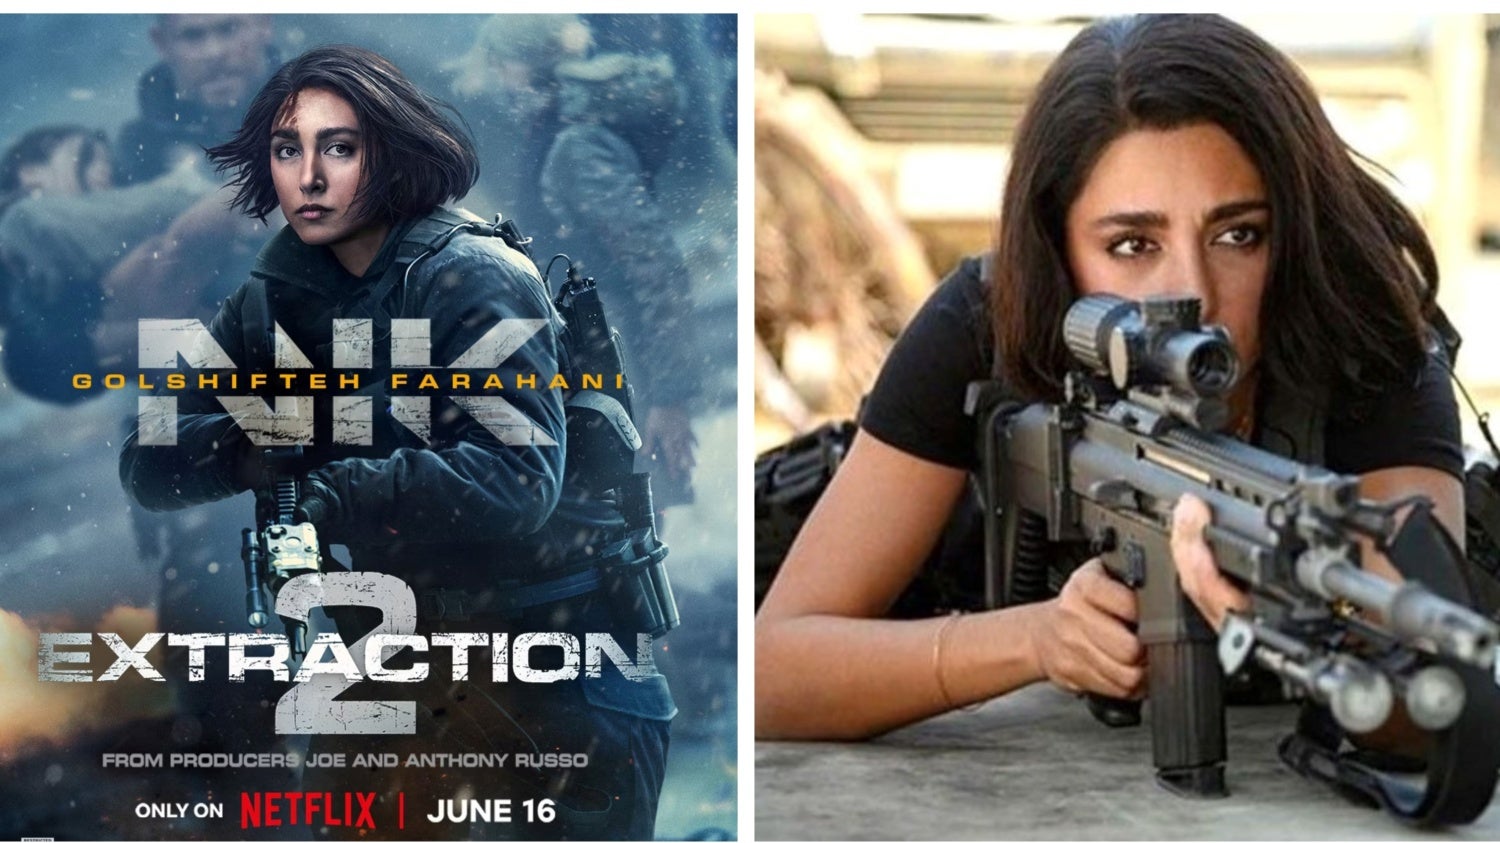 Golshifteh Farahani , who played Nik Khan in the first (right) and second (left) Extraction